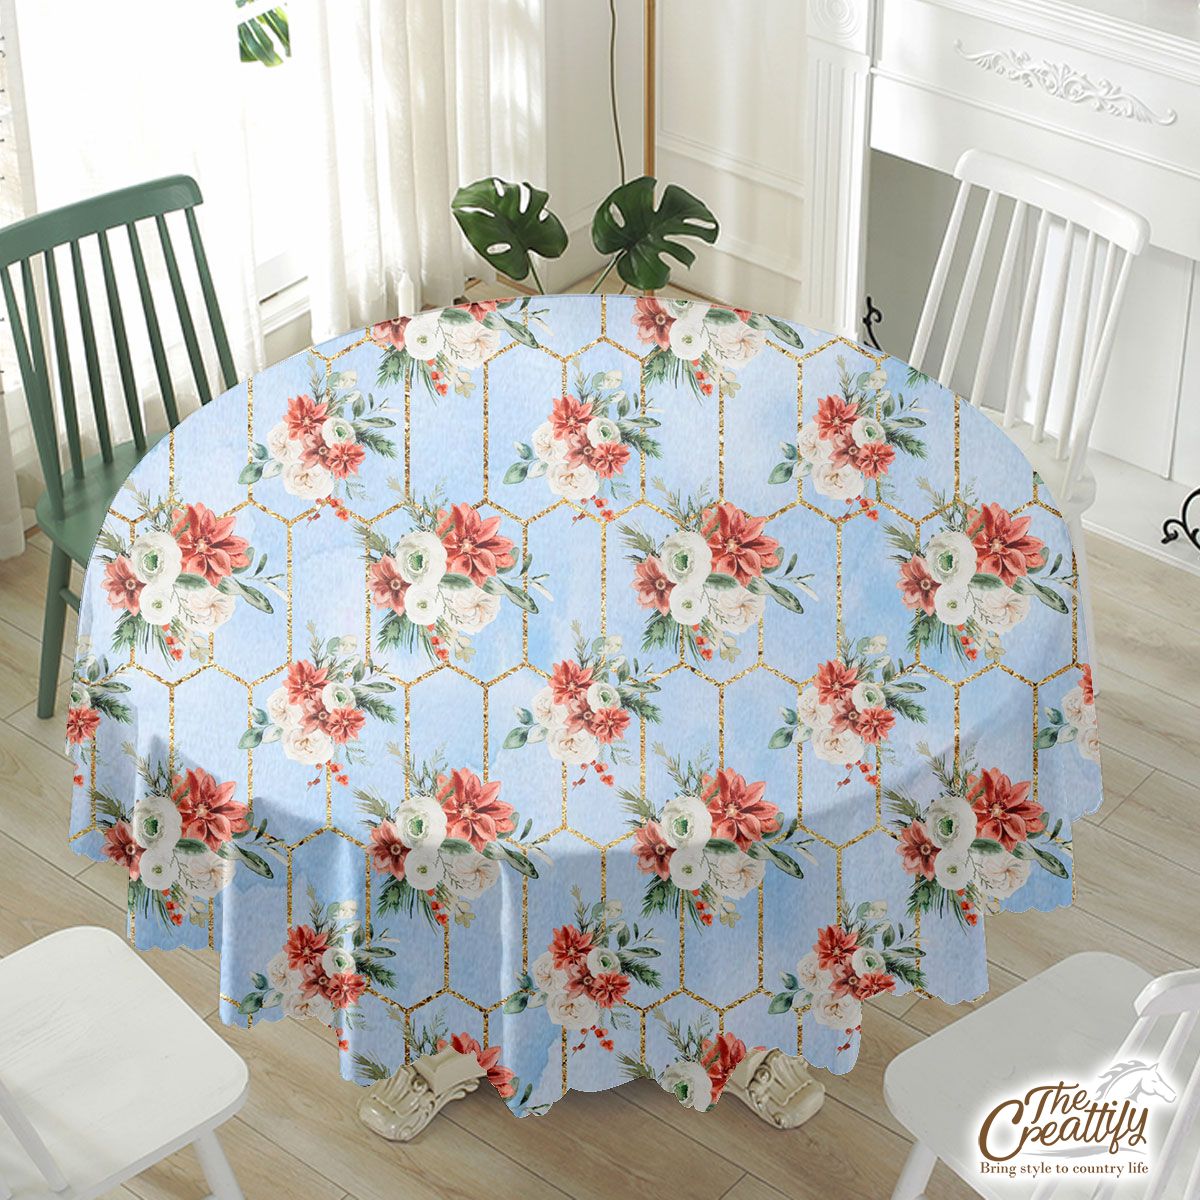 Rose Flower With Christmas Tree Branch And Mistletoe Seamless Pattern Waterproof Tablecloth